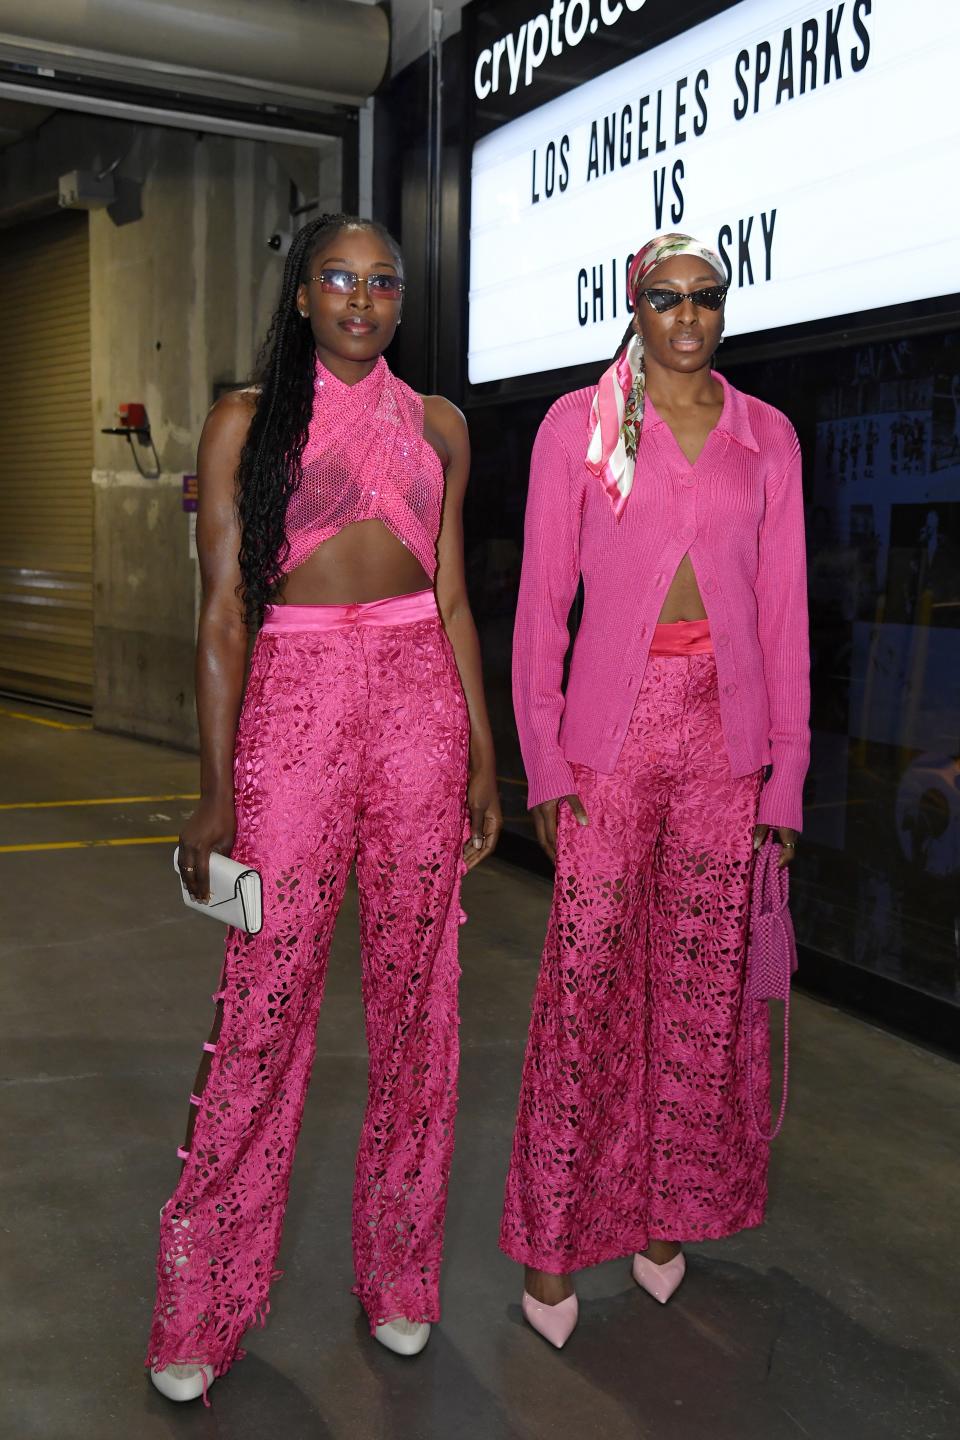 Chiney and Nneka can dress, too.